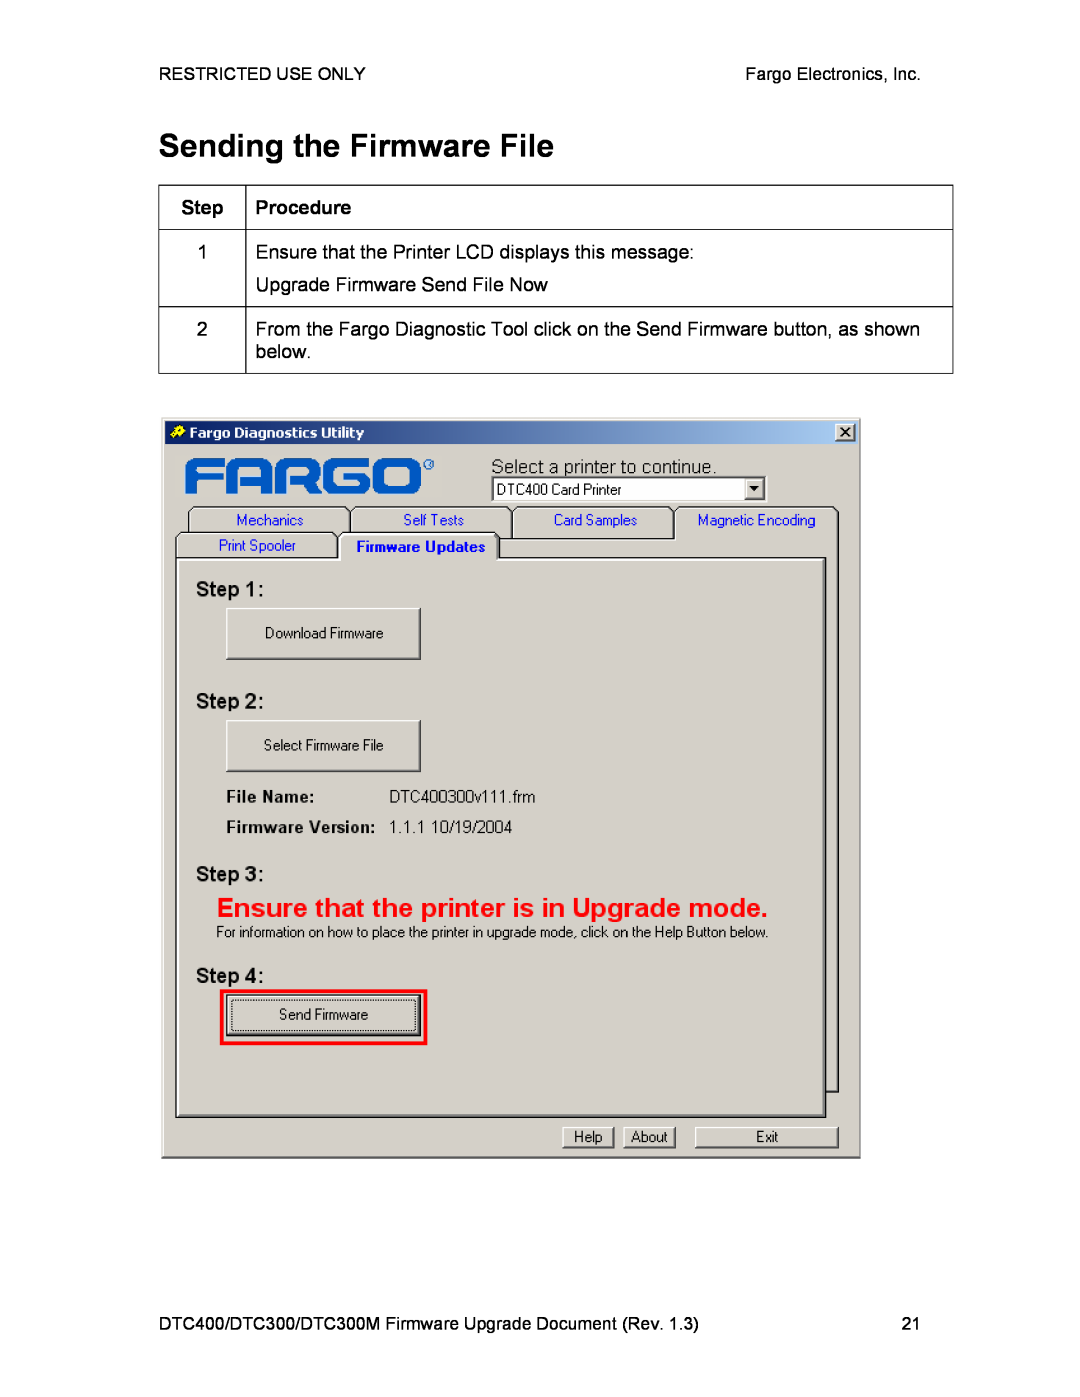 FARGO electronic DTC400, DTC300M manual Sending the Firmware File, Restricted Use Only, Fargo Electronics, Inc 